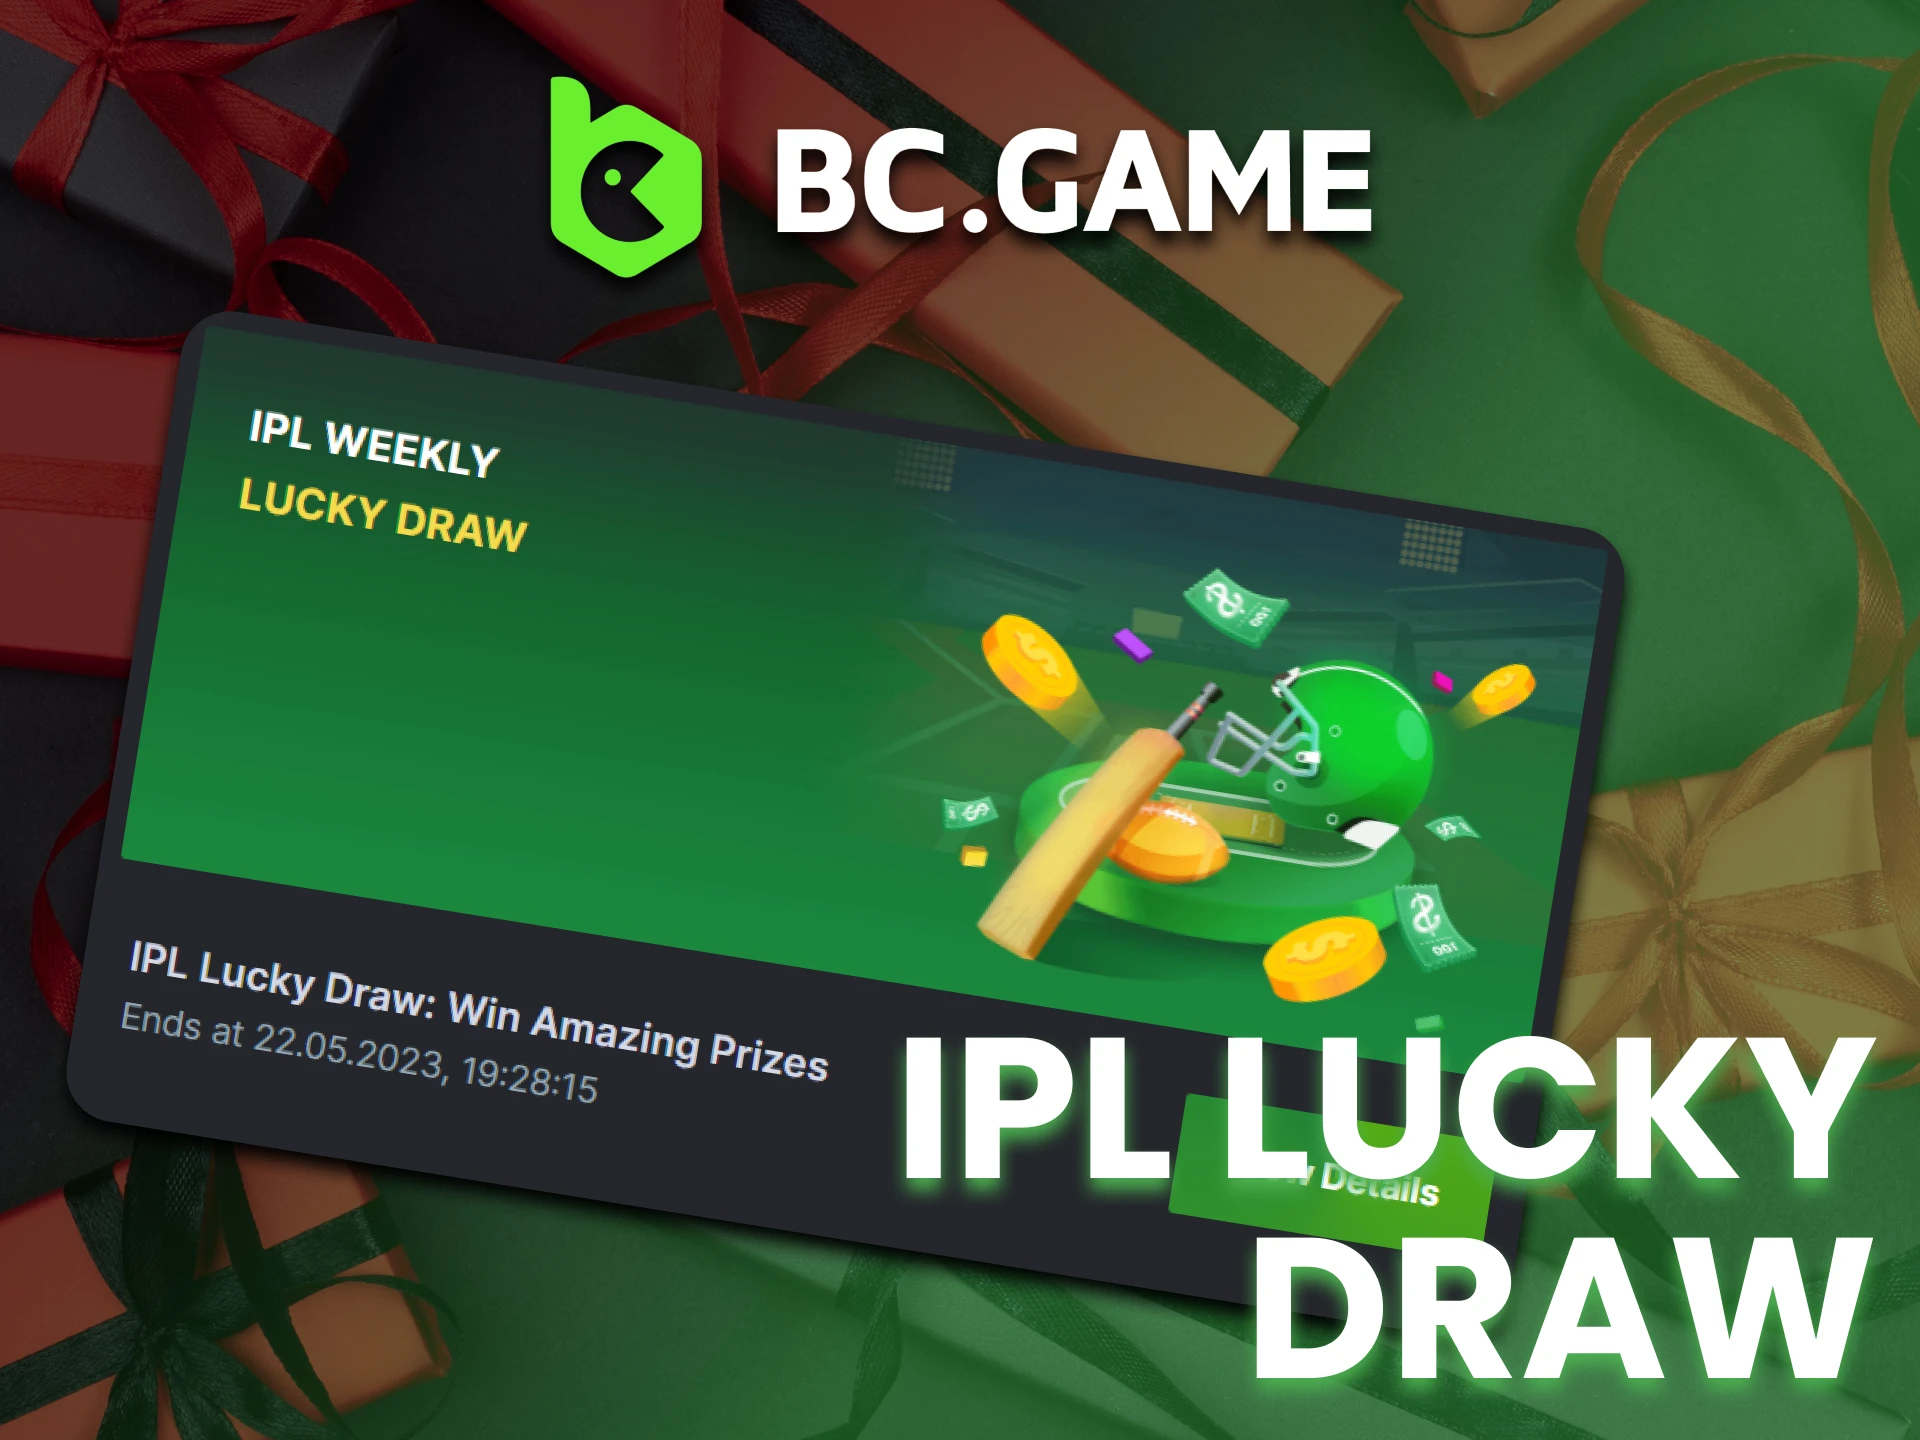 Make lucky bet in BC Game app on IPL matches and win more money.